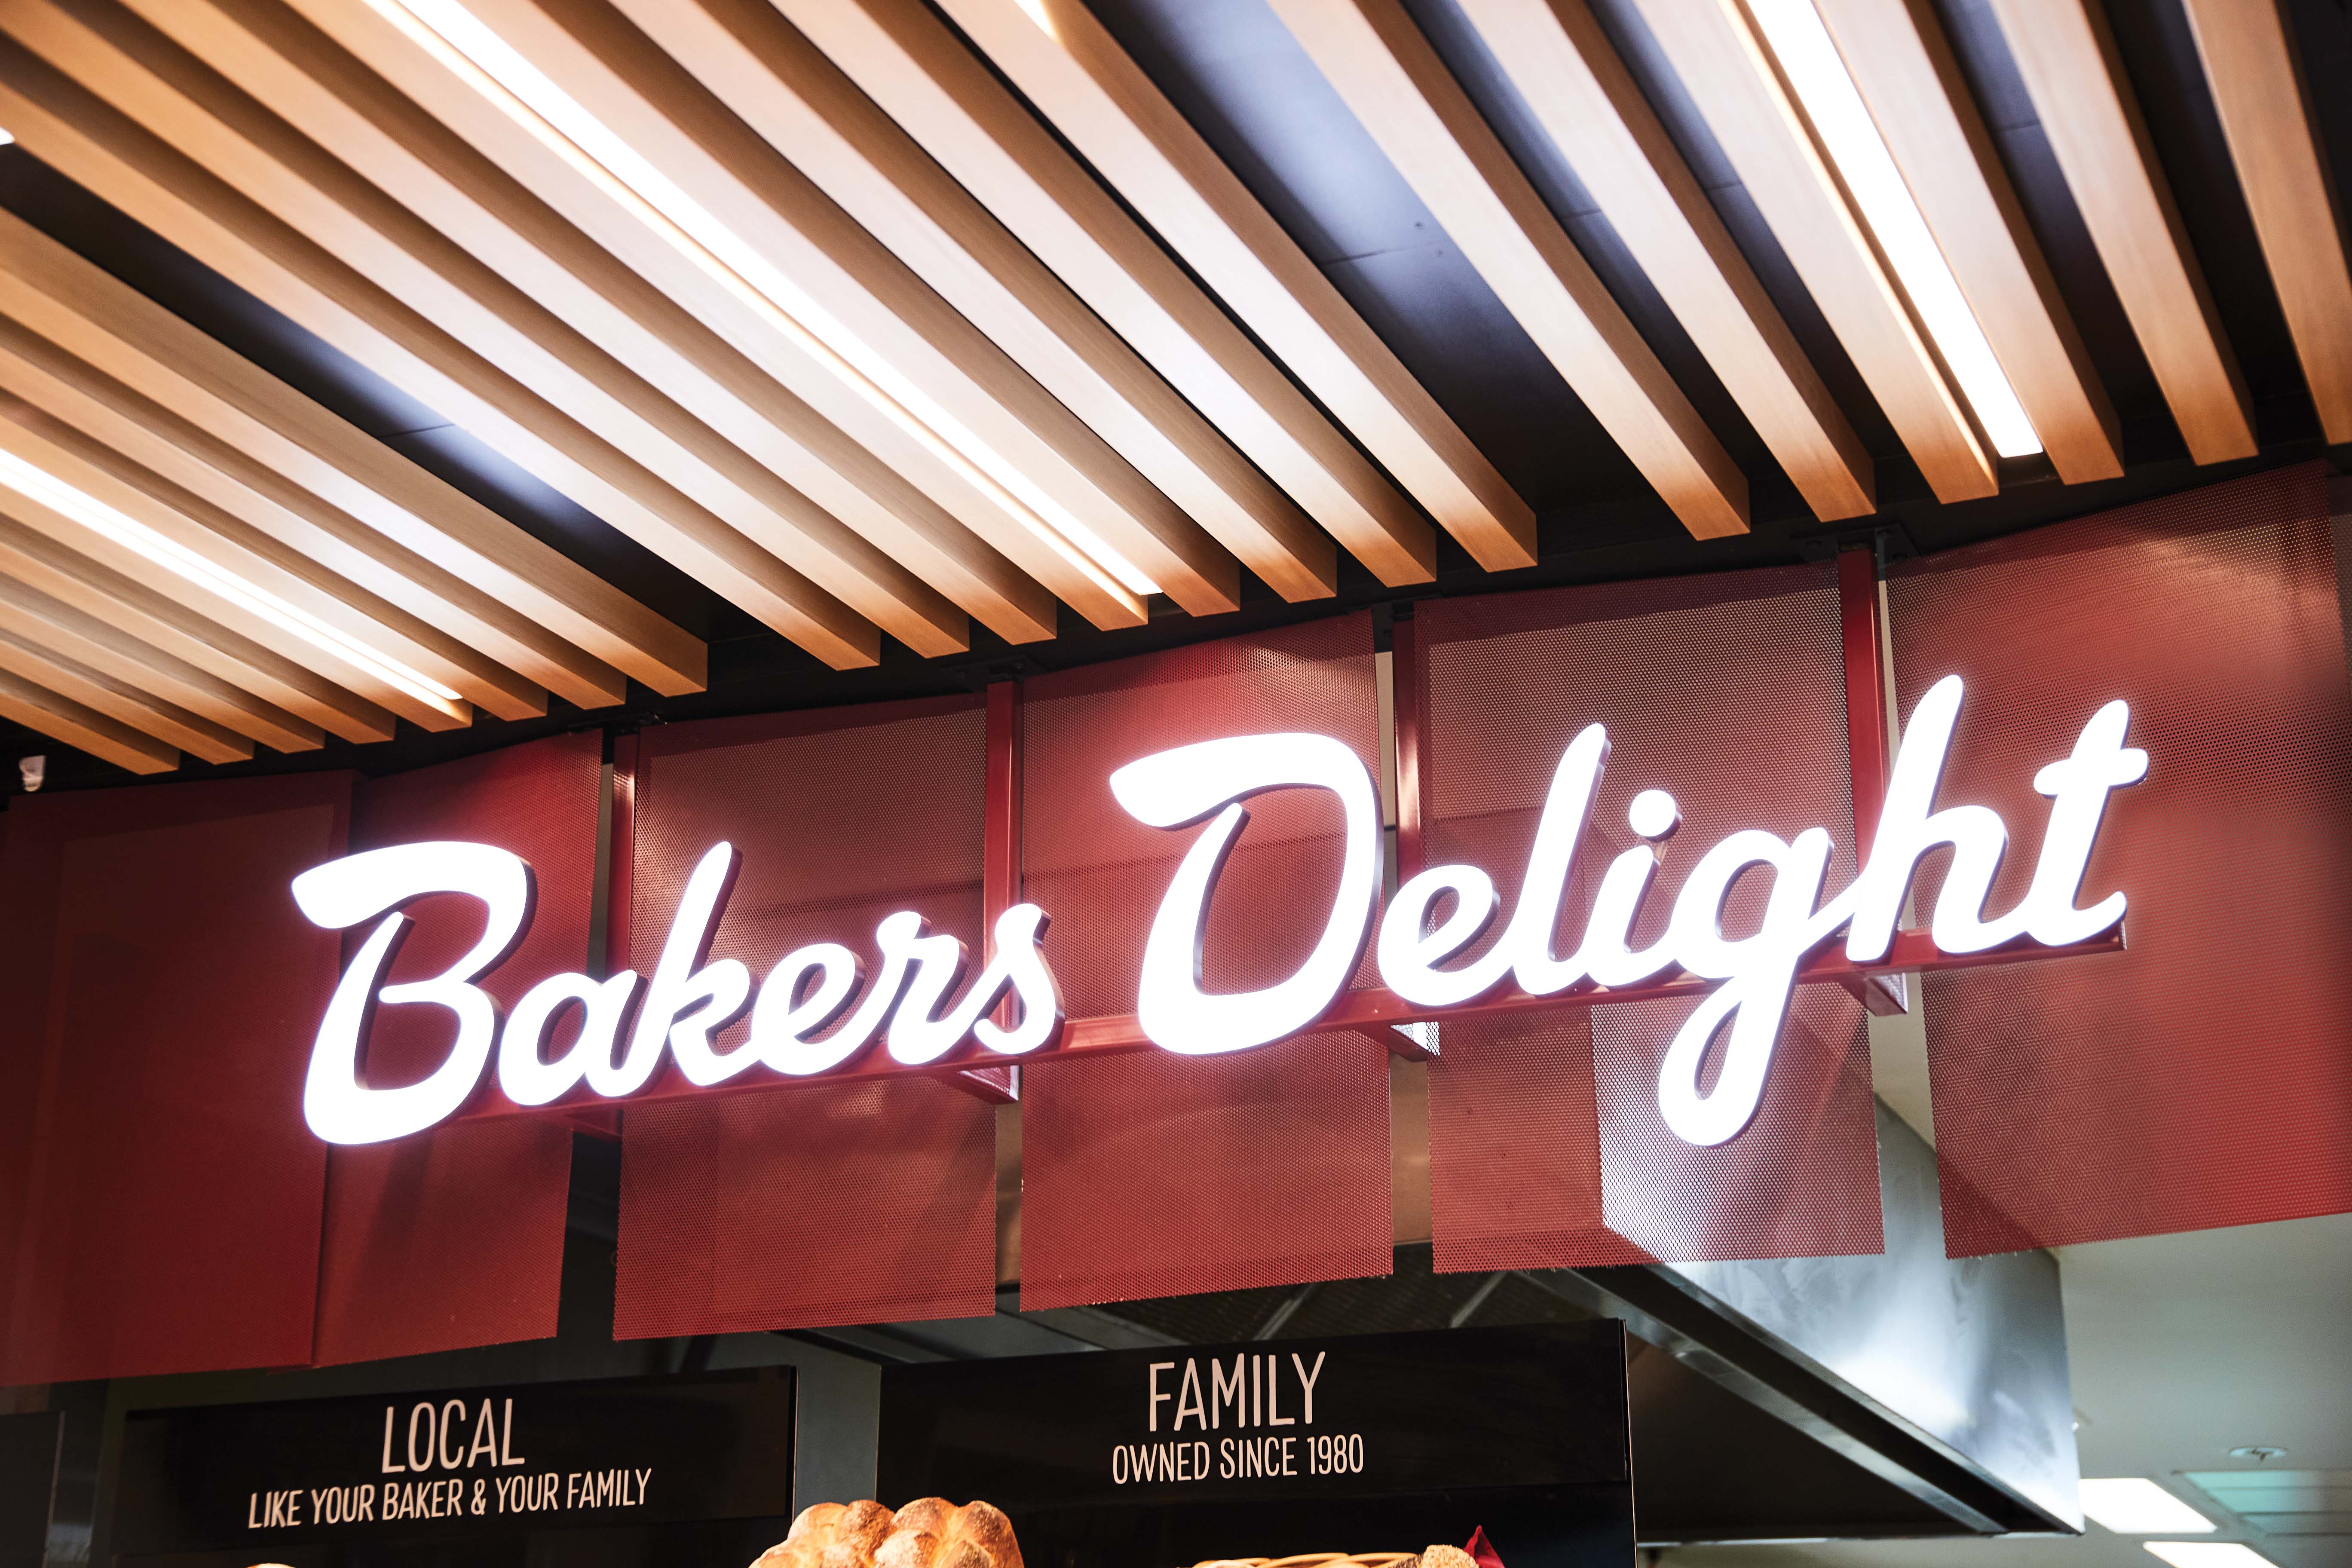 Bakers Delight (@bakersdelight) • Instagram photos and videos